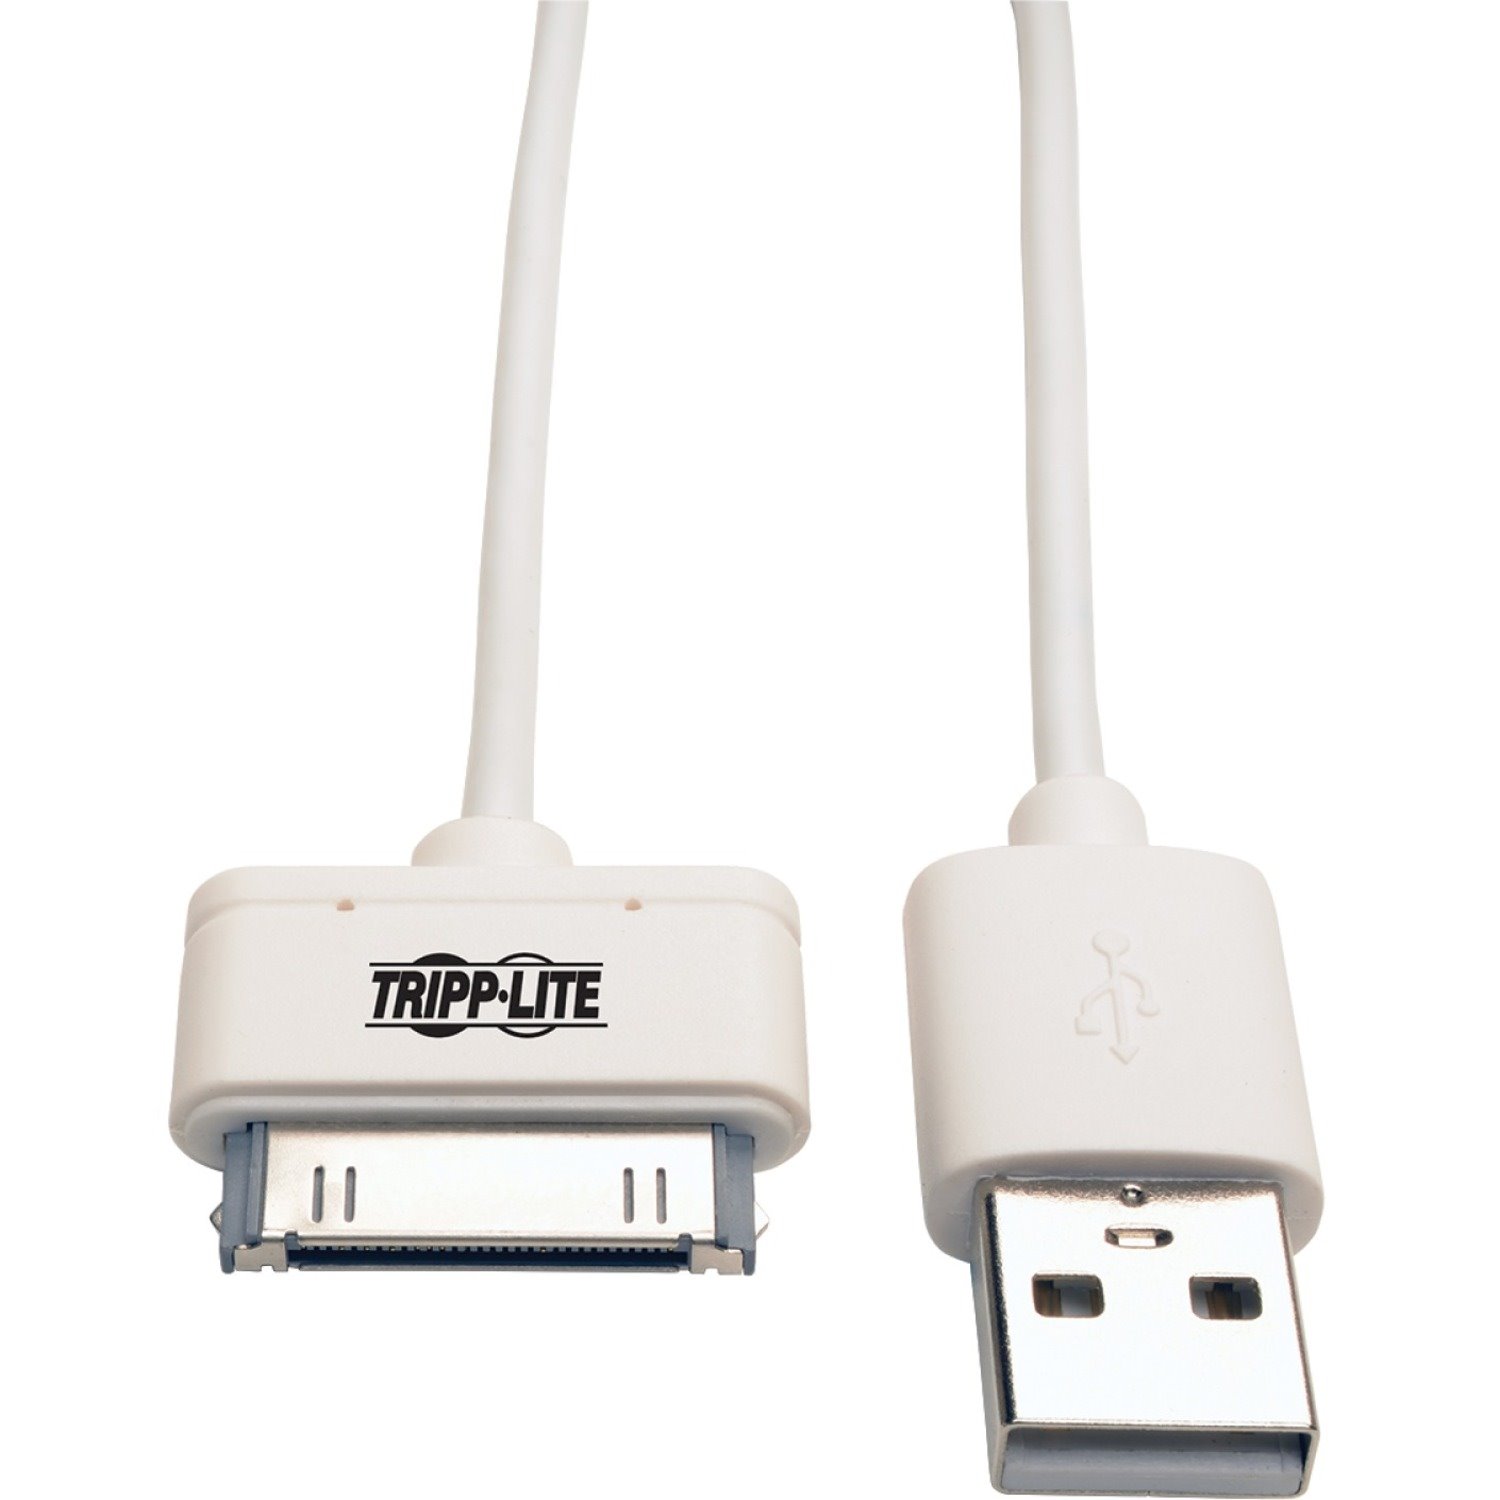 Tripp Lite by Eaton USB Sync/Charge Cable with Apple 30-Pin Dock Connector, White, 3 ft. (0.91 m)